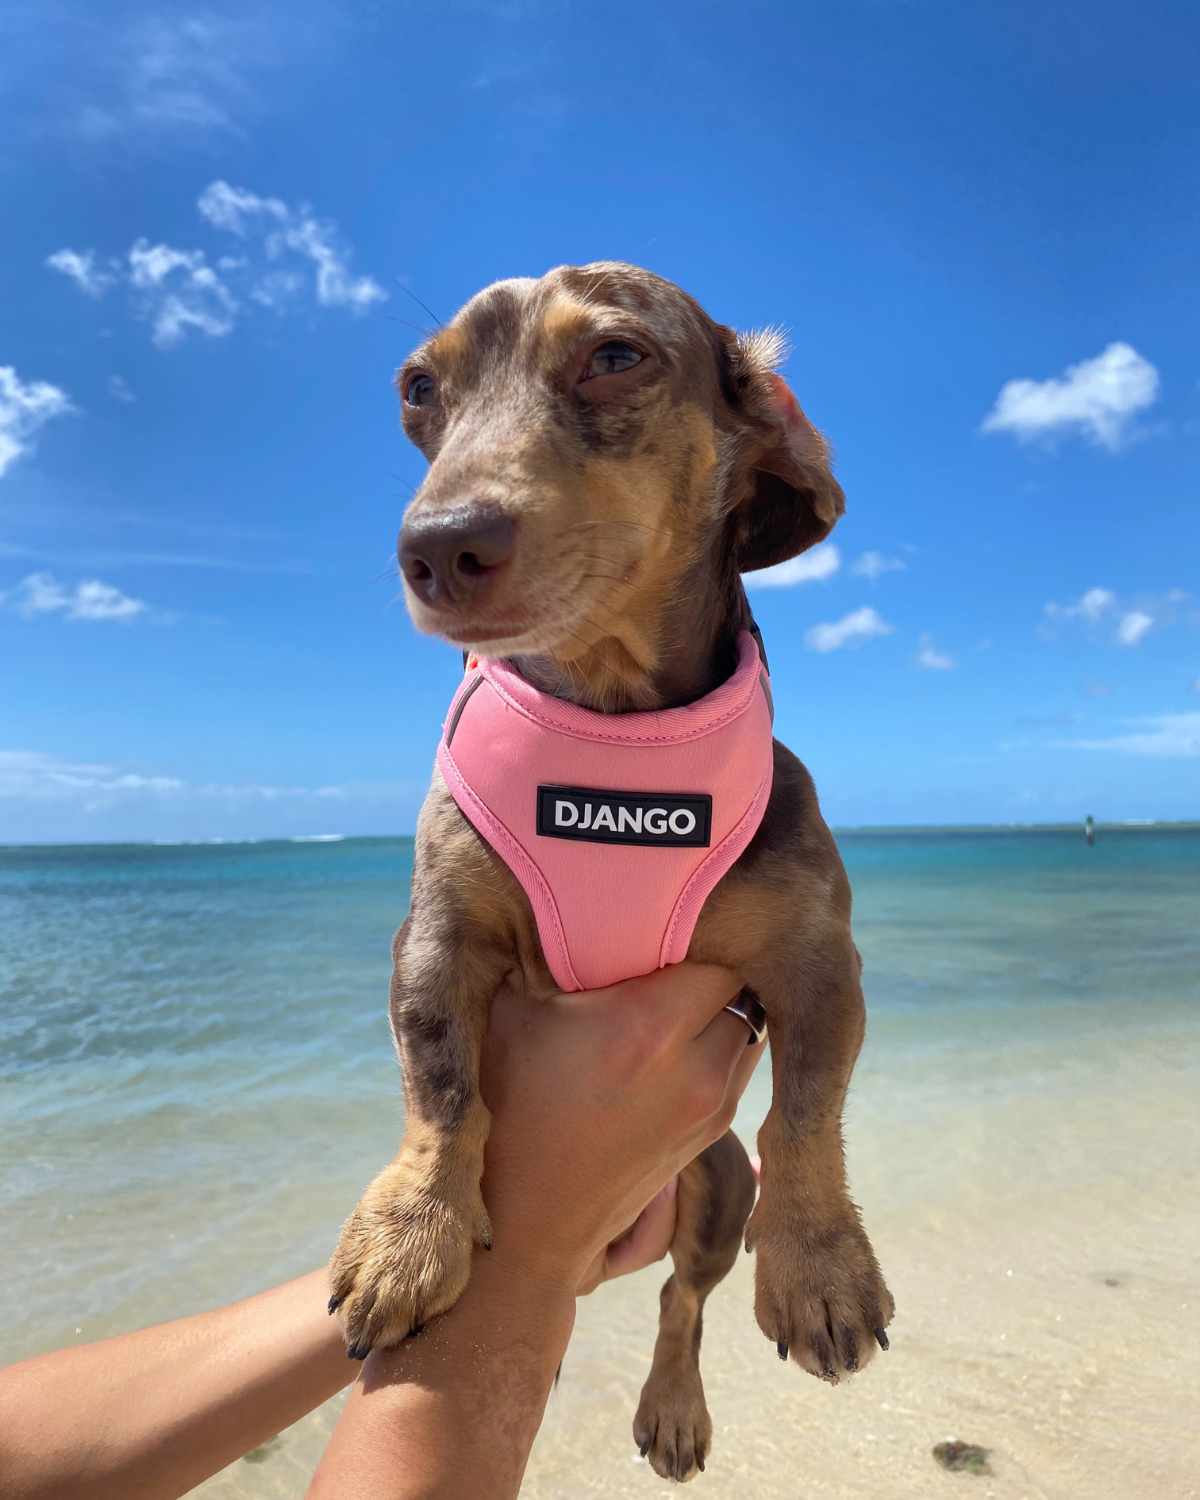 Considered the best harness for dachshunds, DJANGO's Adventure Dog Harness is comfortable, padded, lightweight, and made from water-repellent and easy-to-clean premium neoprene - djangobrand.com